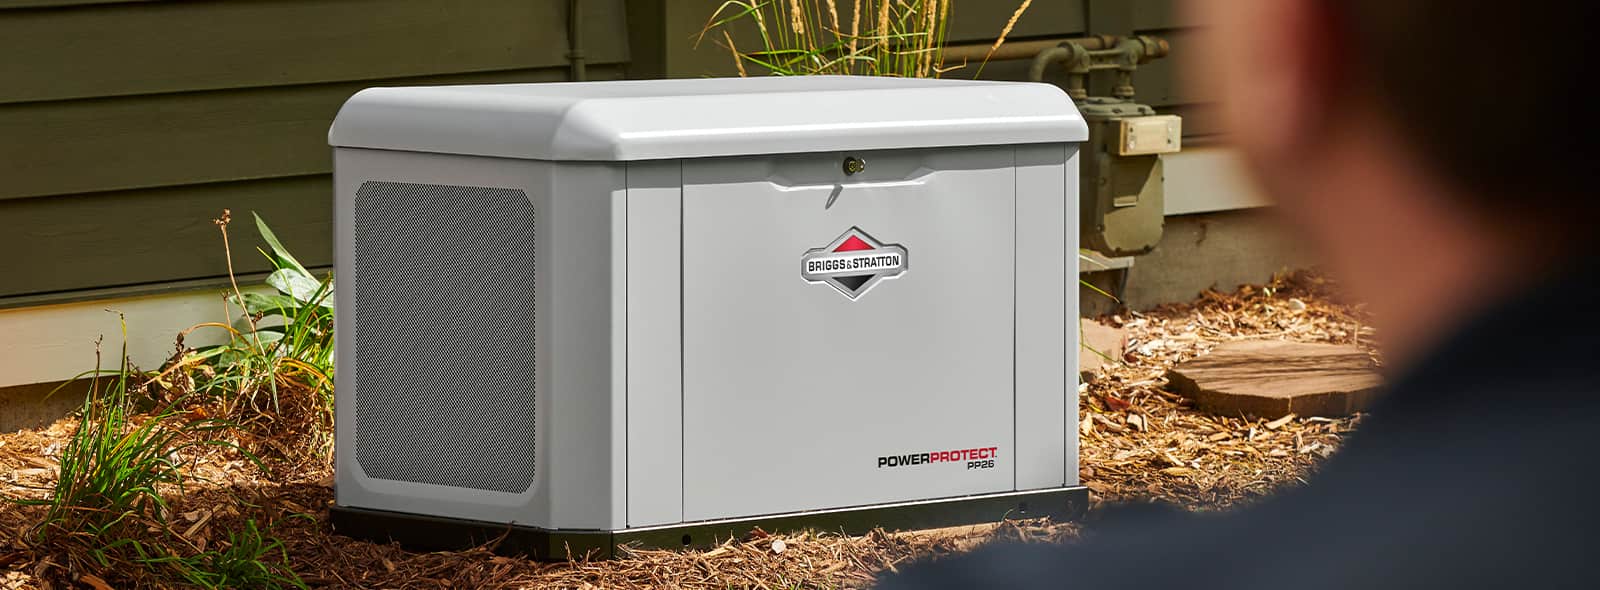 The New 26kW Air-Cooled Home Generator